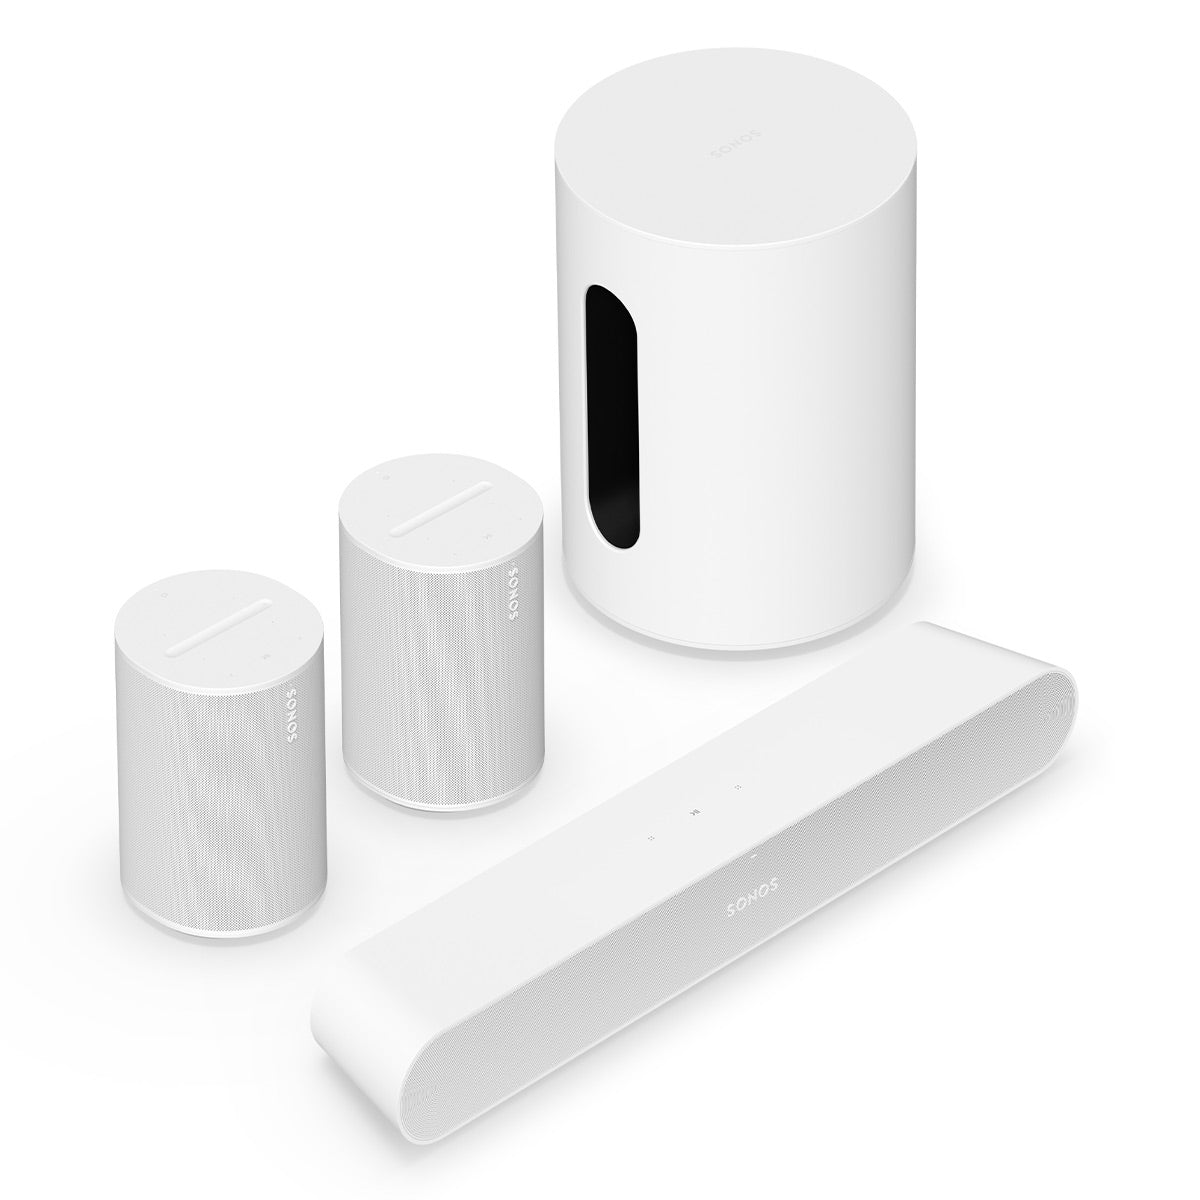 Sonos Immersive Set with Ray Compact Soundbar, Sub Mini Wireless Subwoofer, and Pair of Era 100 Wireless Smart Speakers (White)